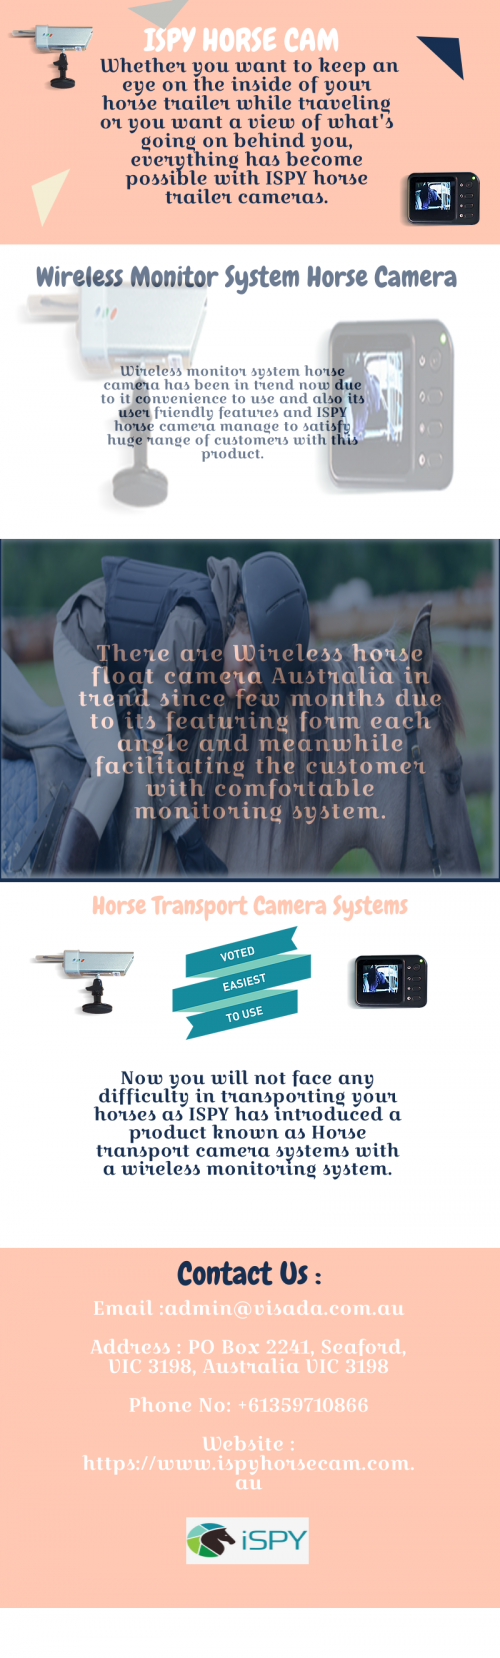 if you use Wireless Ispy horse camera your house will be secured and also it will not scatter wires in your house due to its wireless Feature.https://www.ispyhorsecam.com.au/